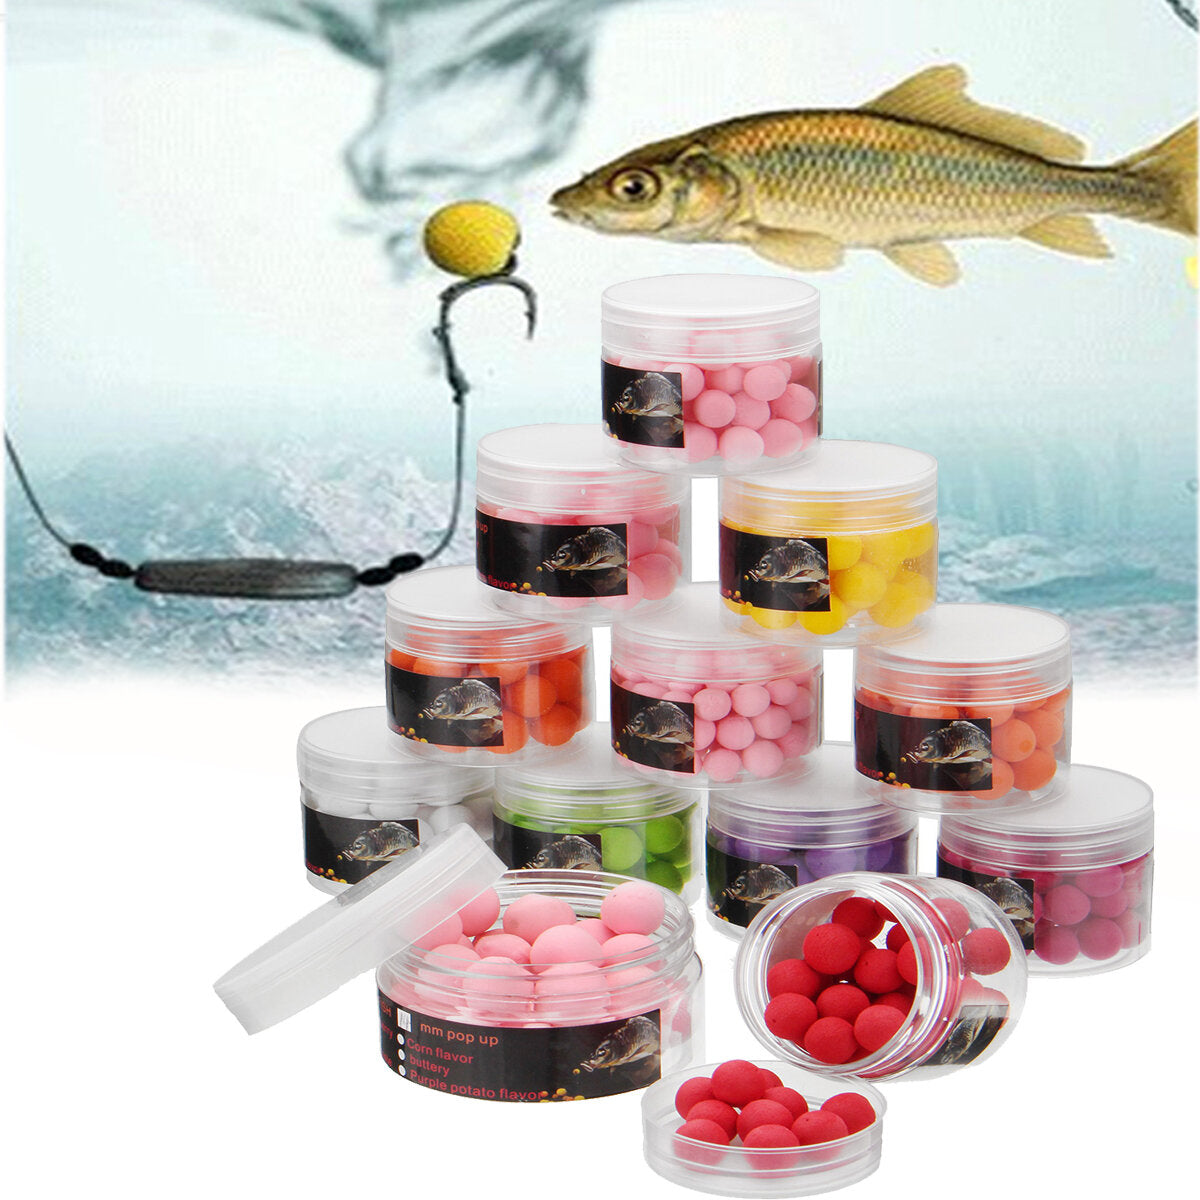 8-14mm Course Carp Fishing Lures Pop Ups Baits 9 Colors 9 Flavours Floating Lure Ball Beads